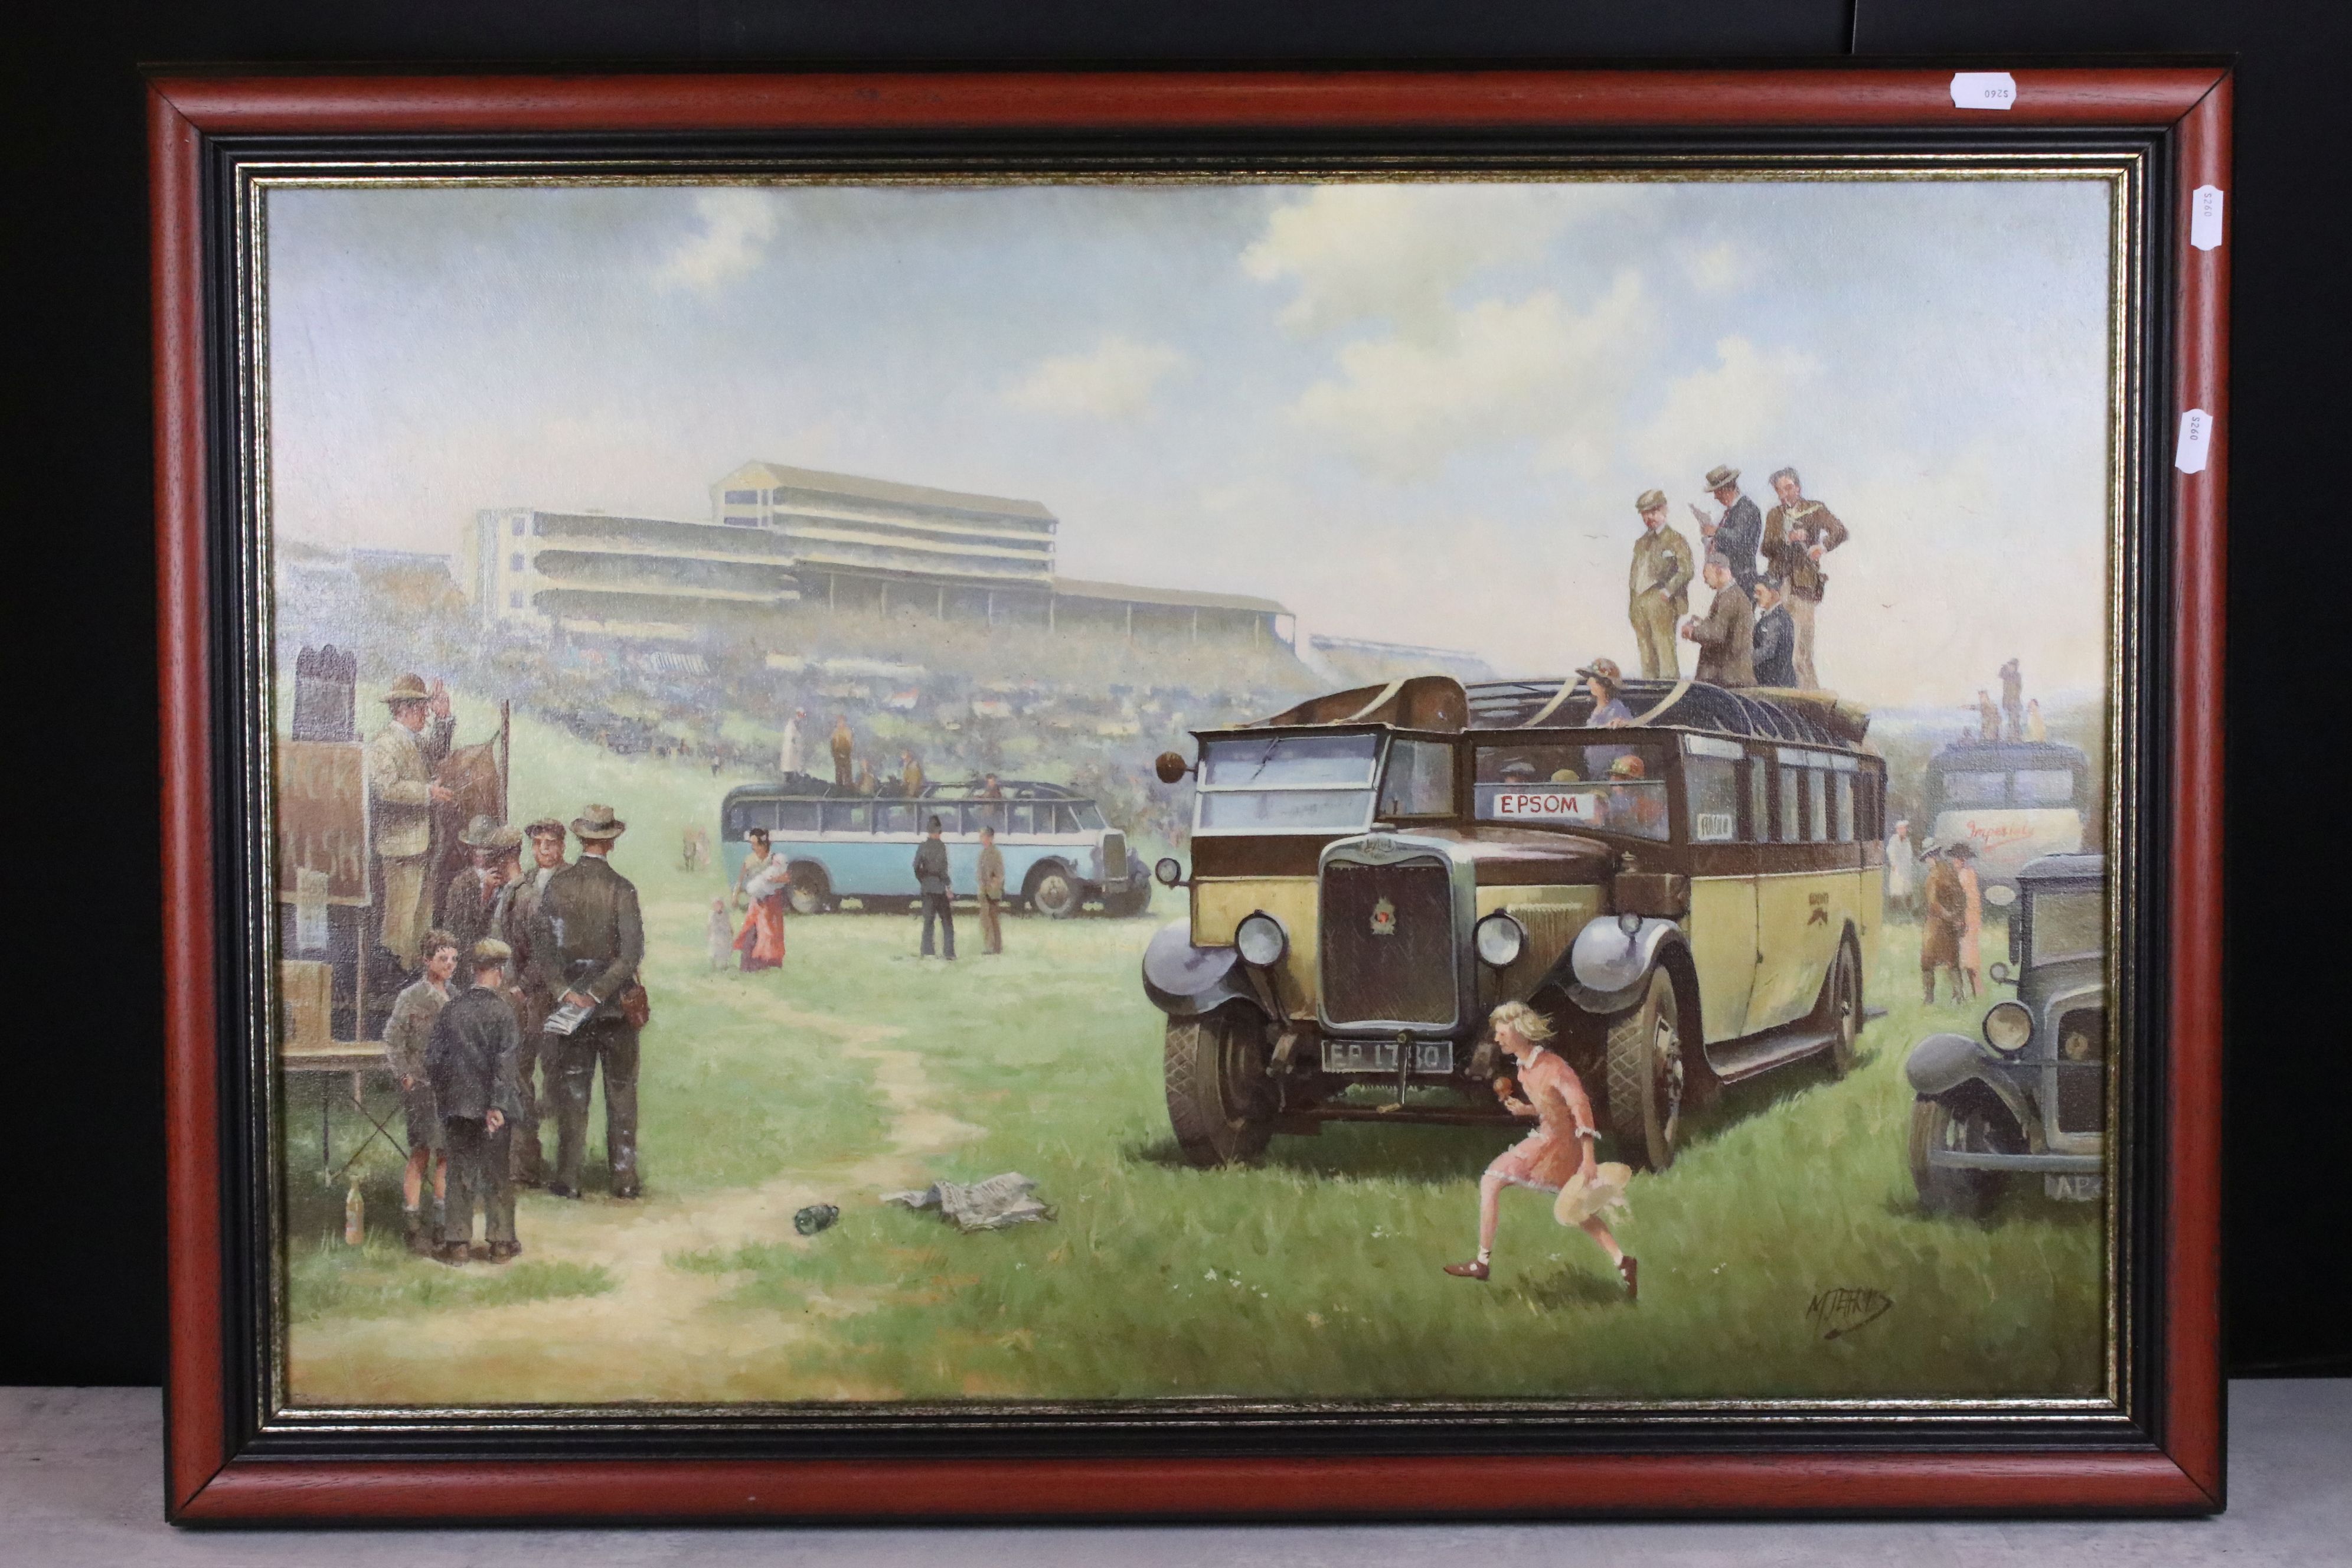 Mike Jeffries (B.1939) Oil Painting on Canvas of Figures and Buses at an Epsom Race Horse Meeting,